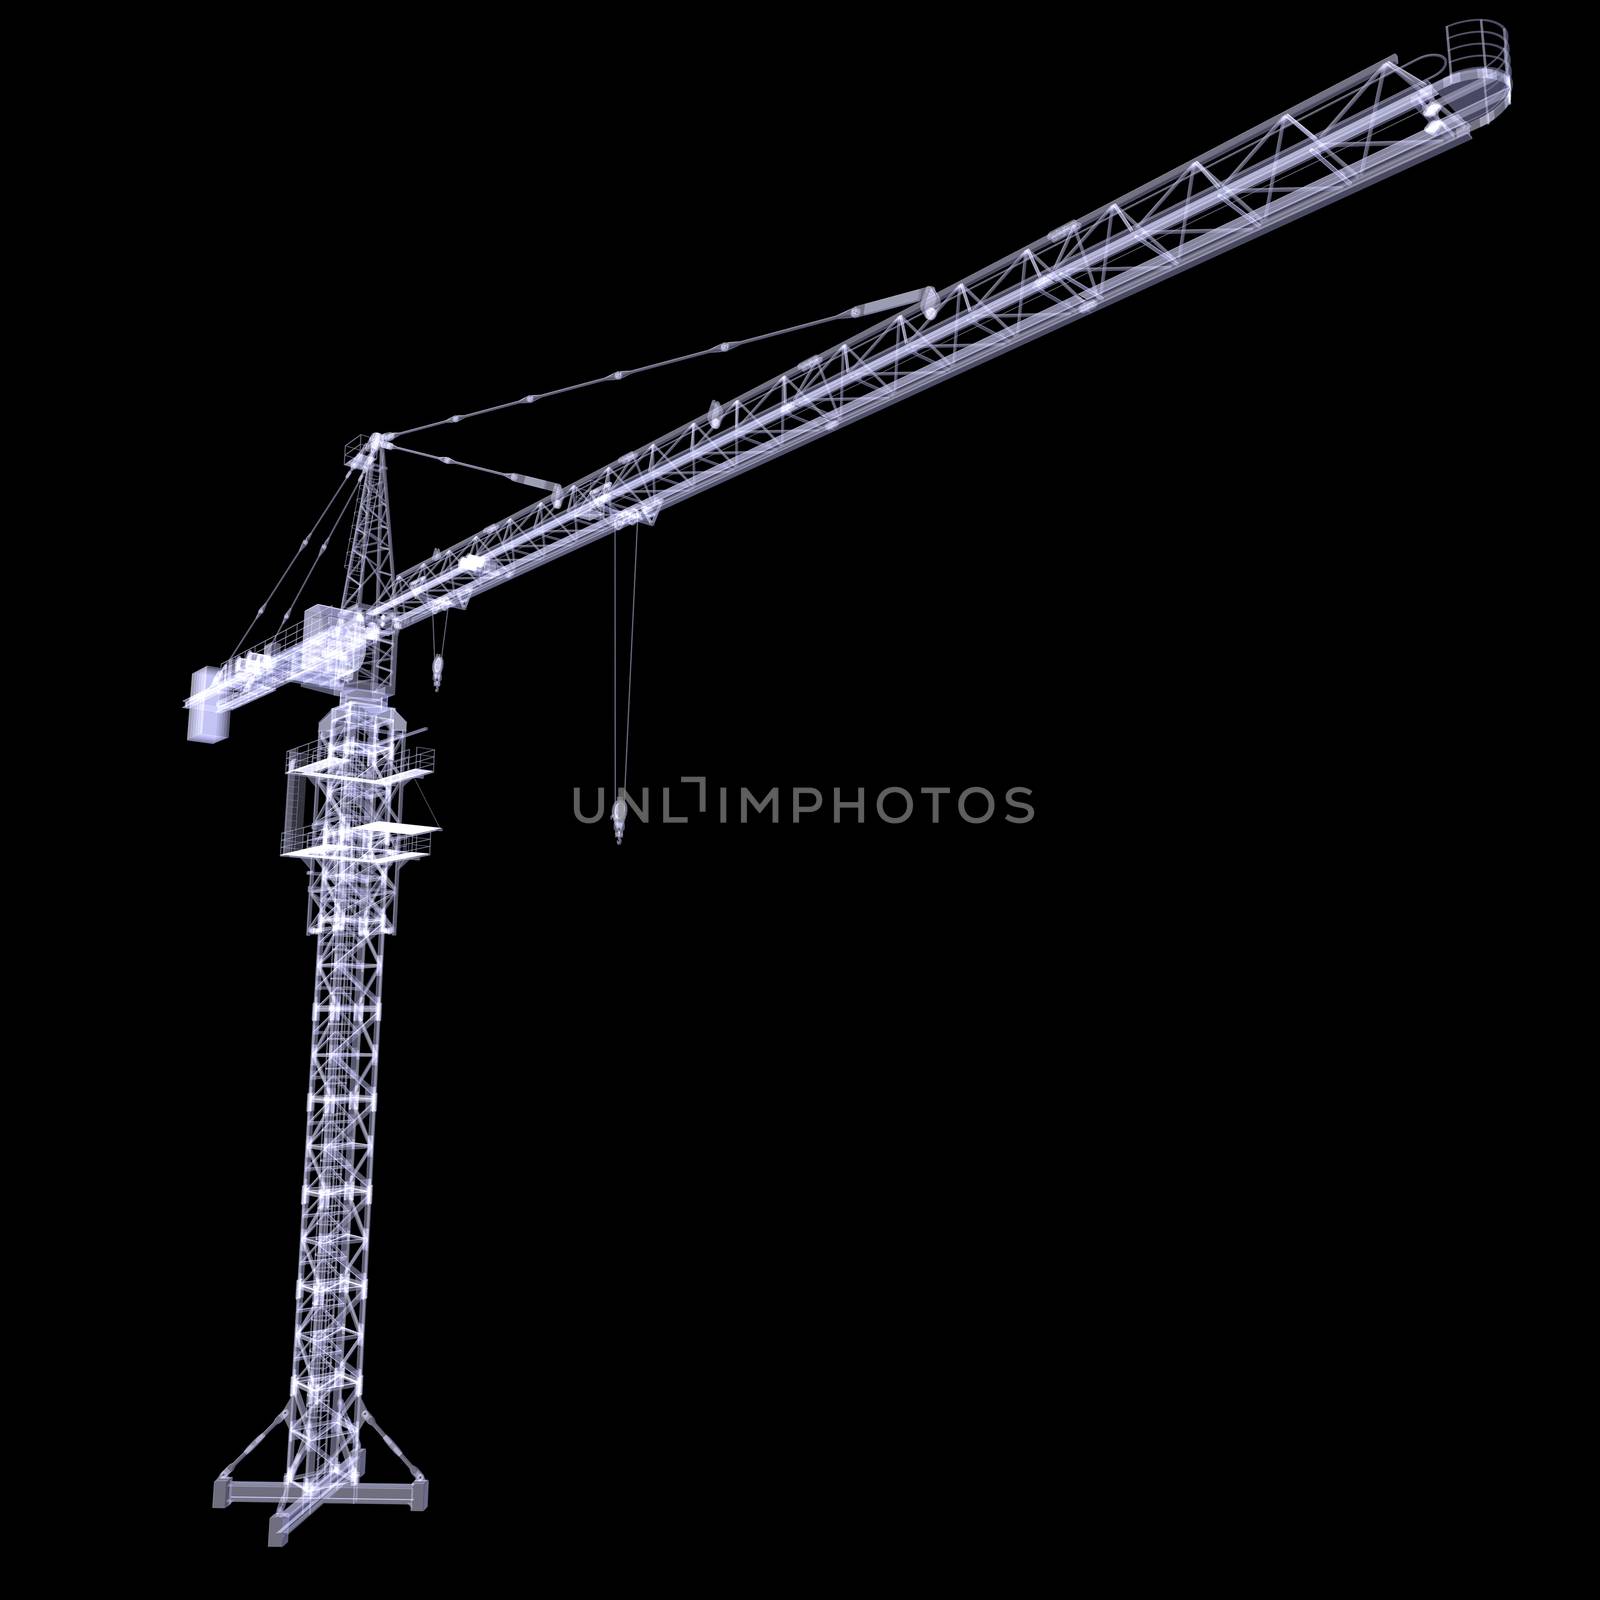 X-ray tower crane. 3d rendering on black background